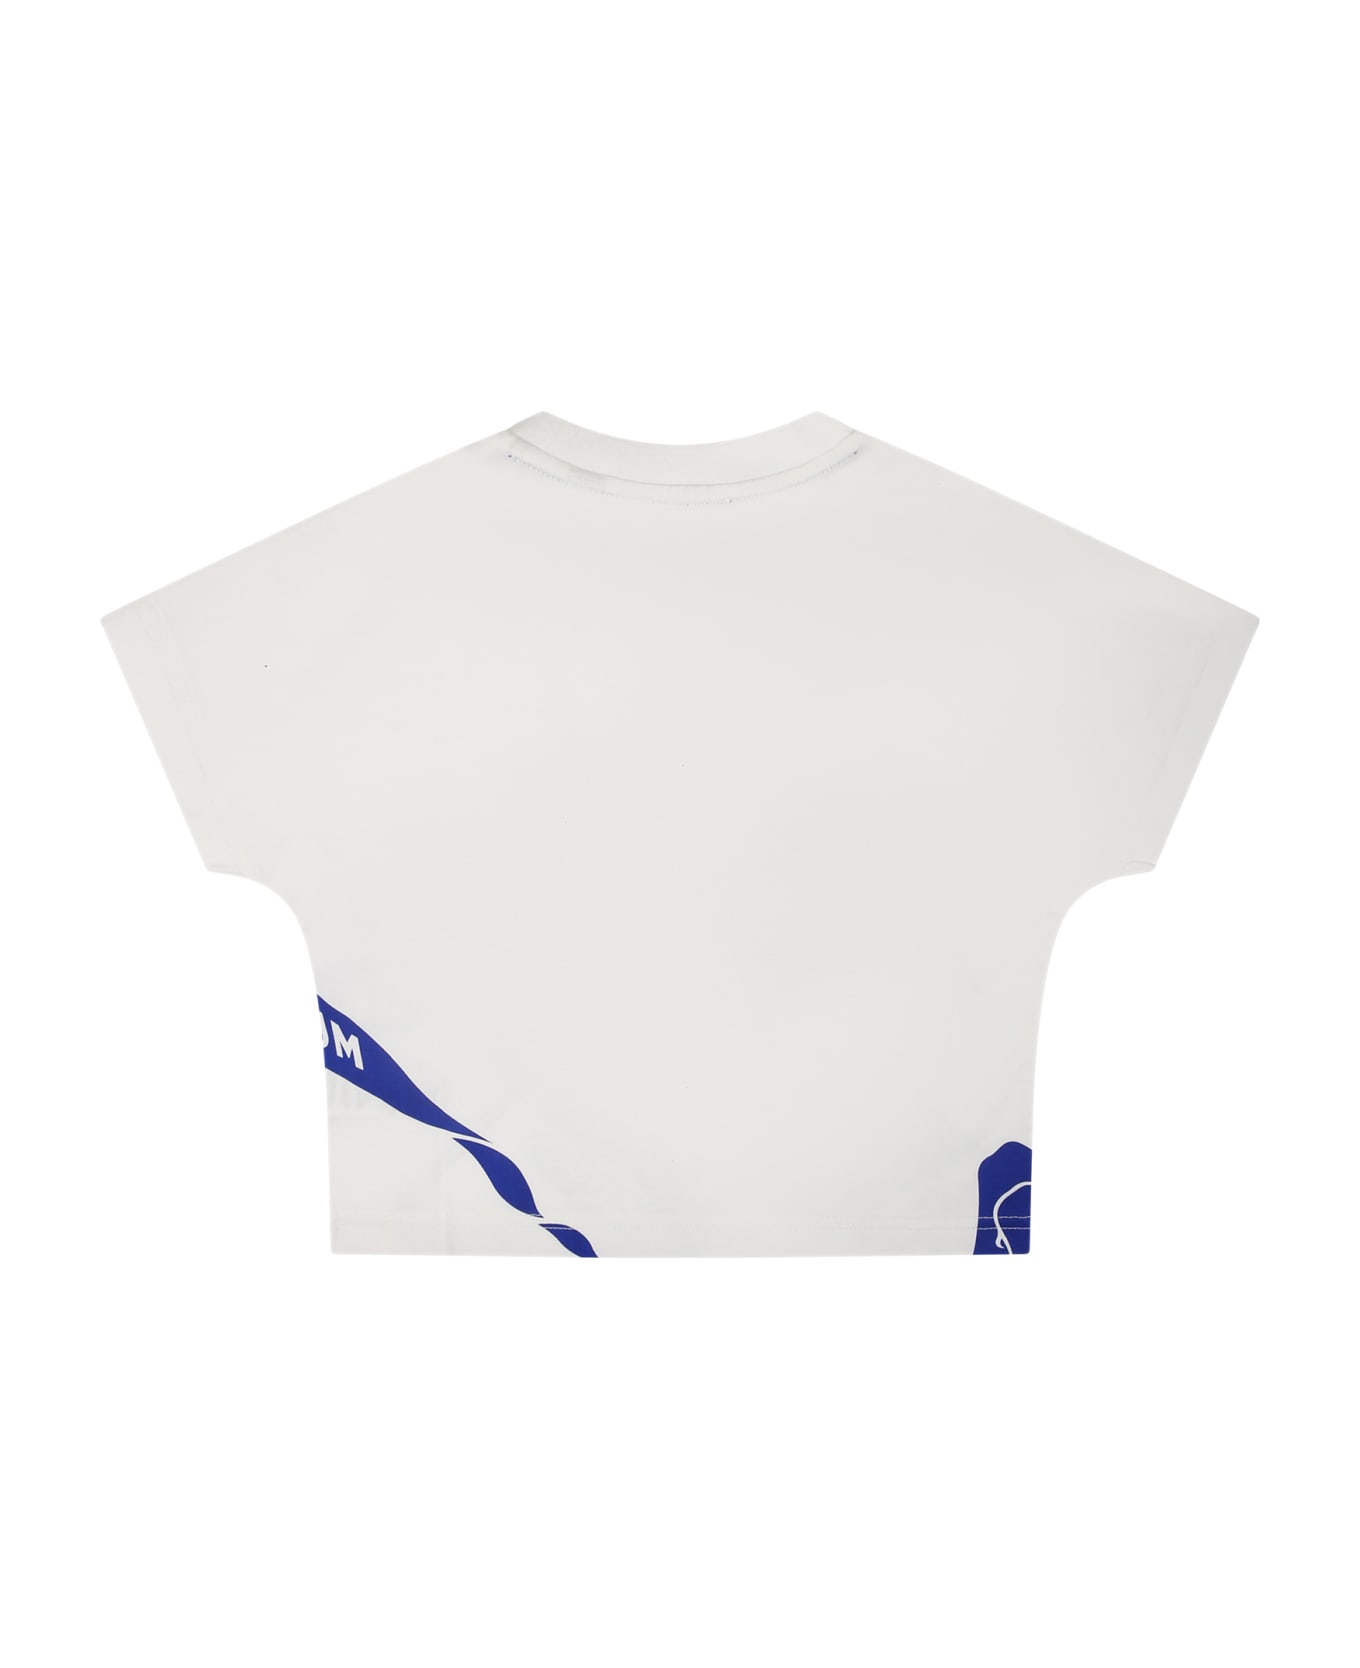 Burberry White T-shirt For Baby Girl With Print - Bianco